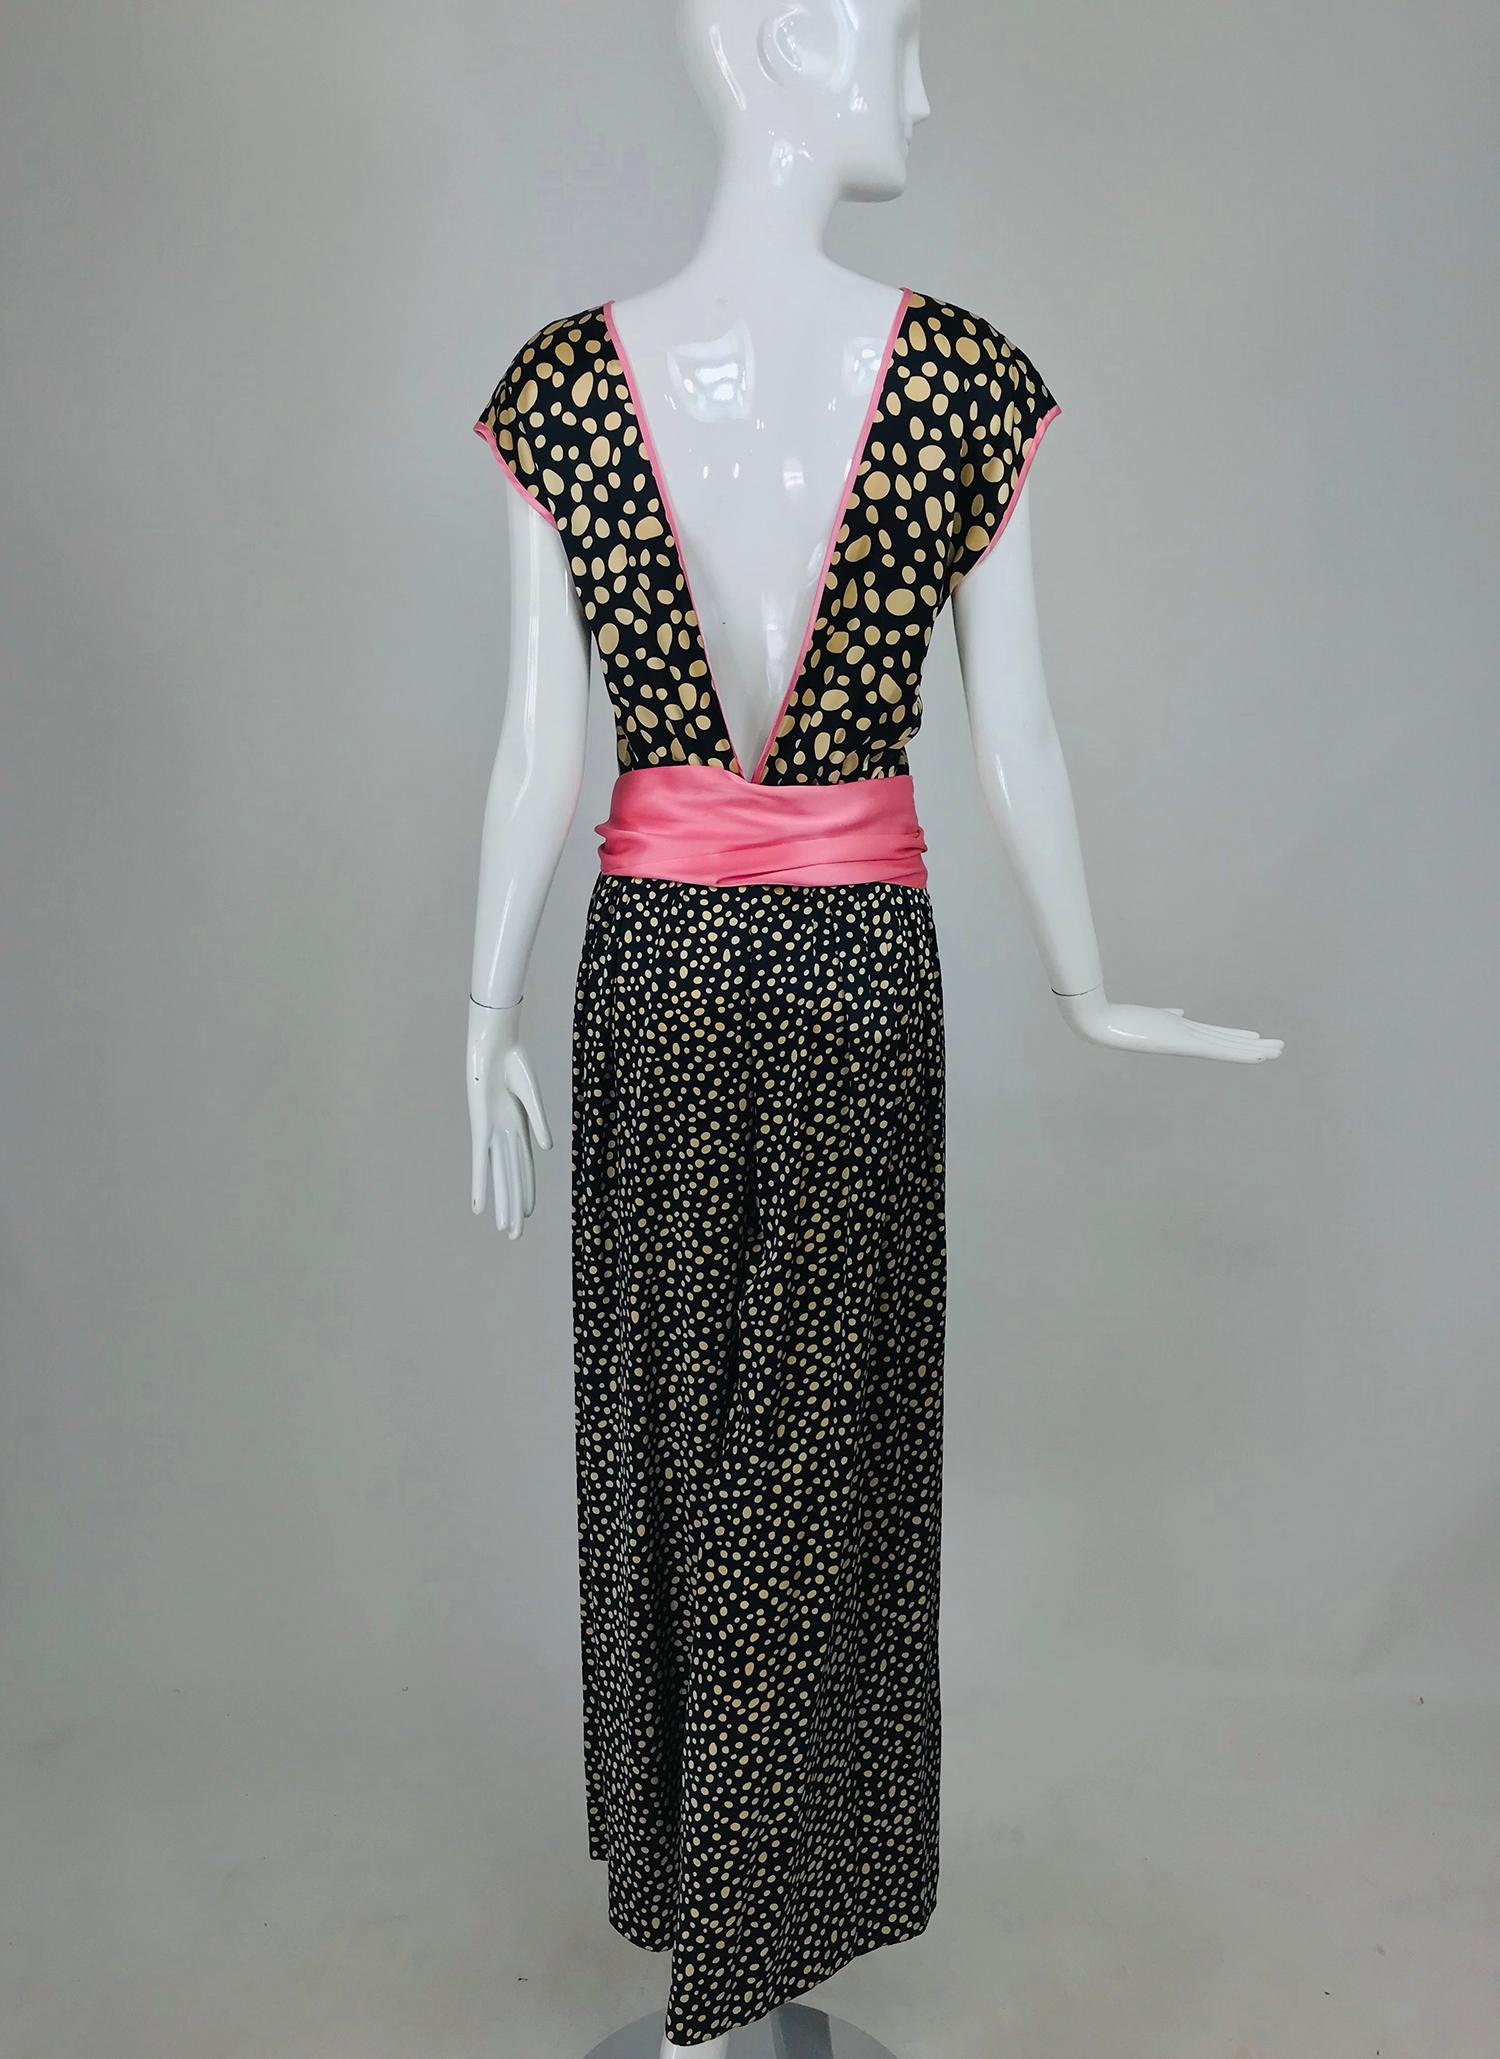 Guy Laroche Silk Evening Pajama set in Cream and Black Dots Pink Trim 1990s For Sale 2